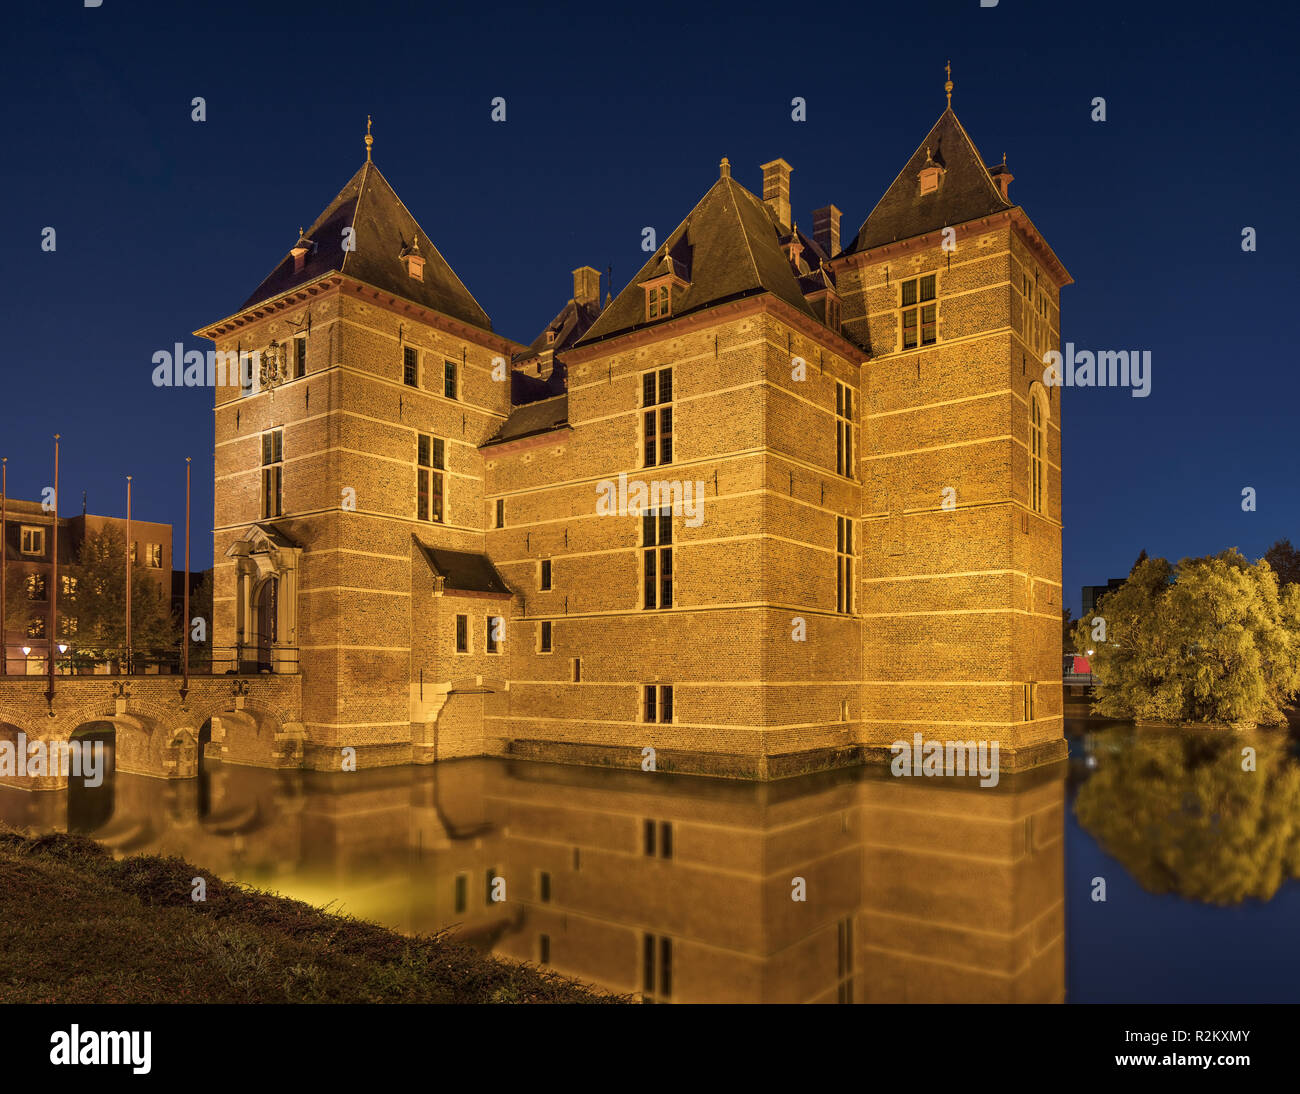 Illuminated 12th Century renovated Castle surrounded by water at night, Europe. Stock Photo